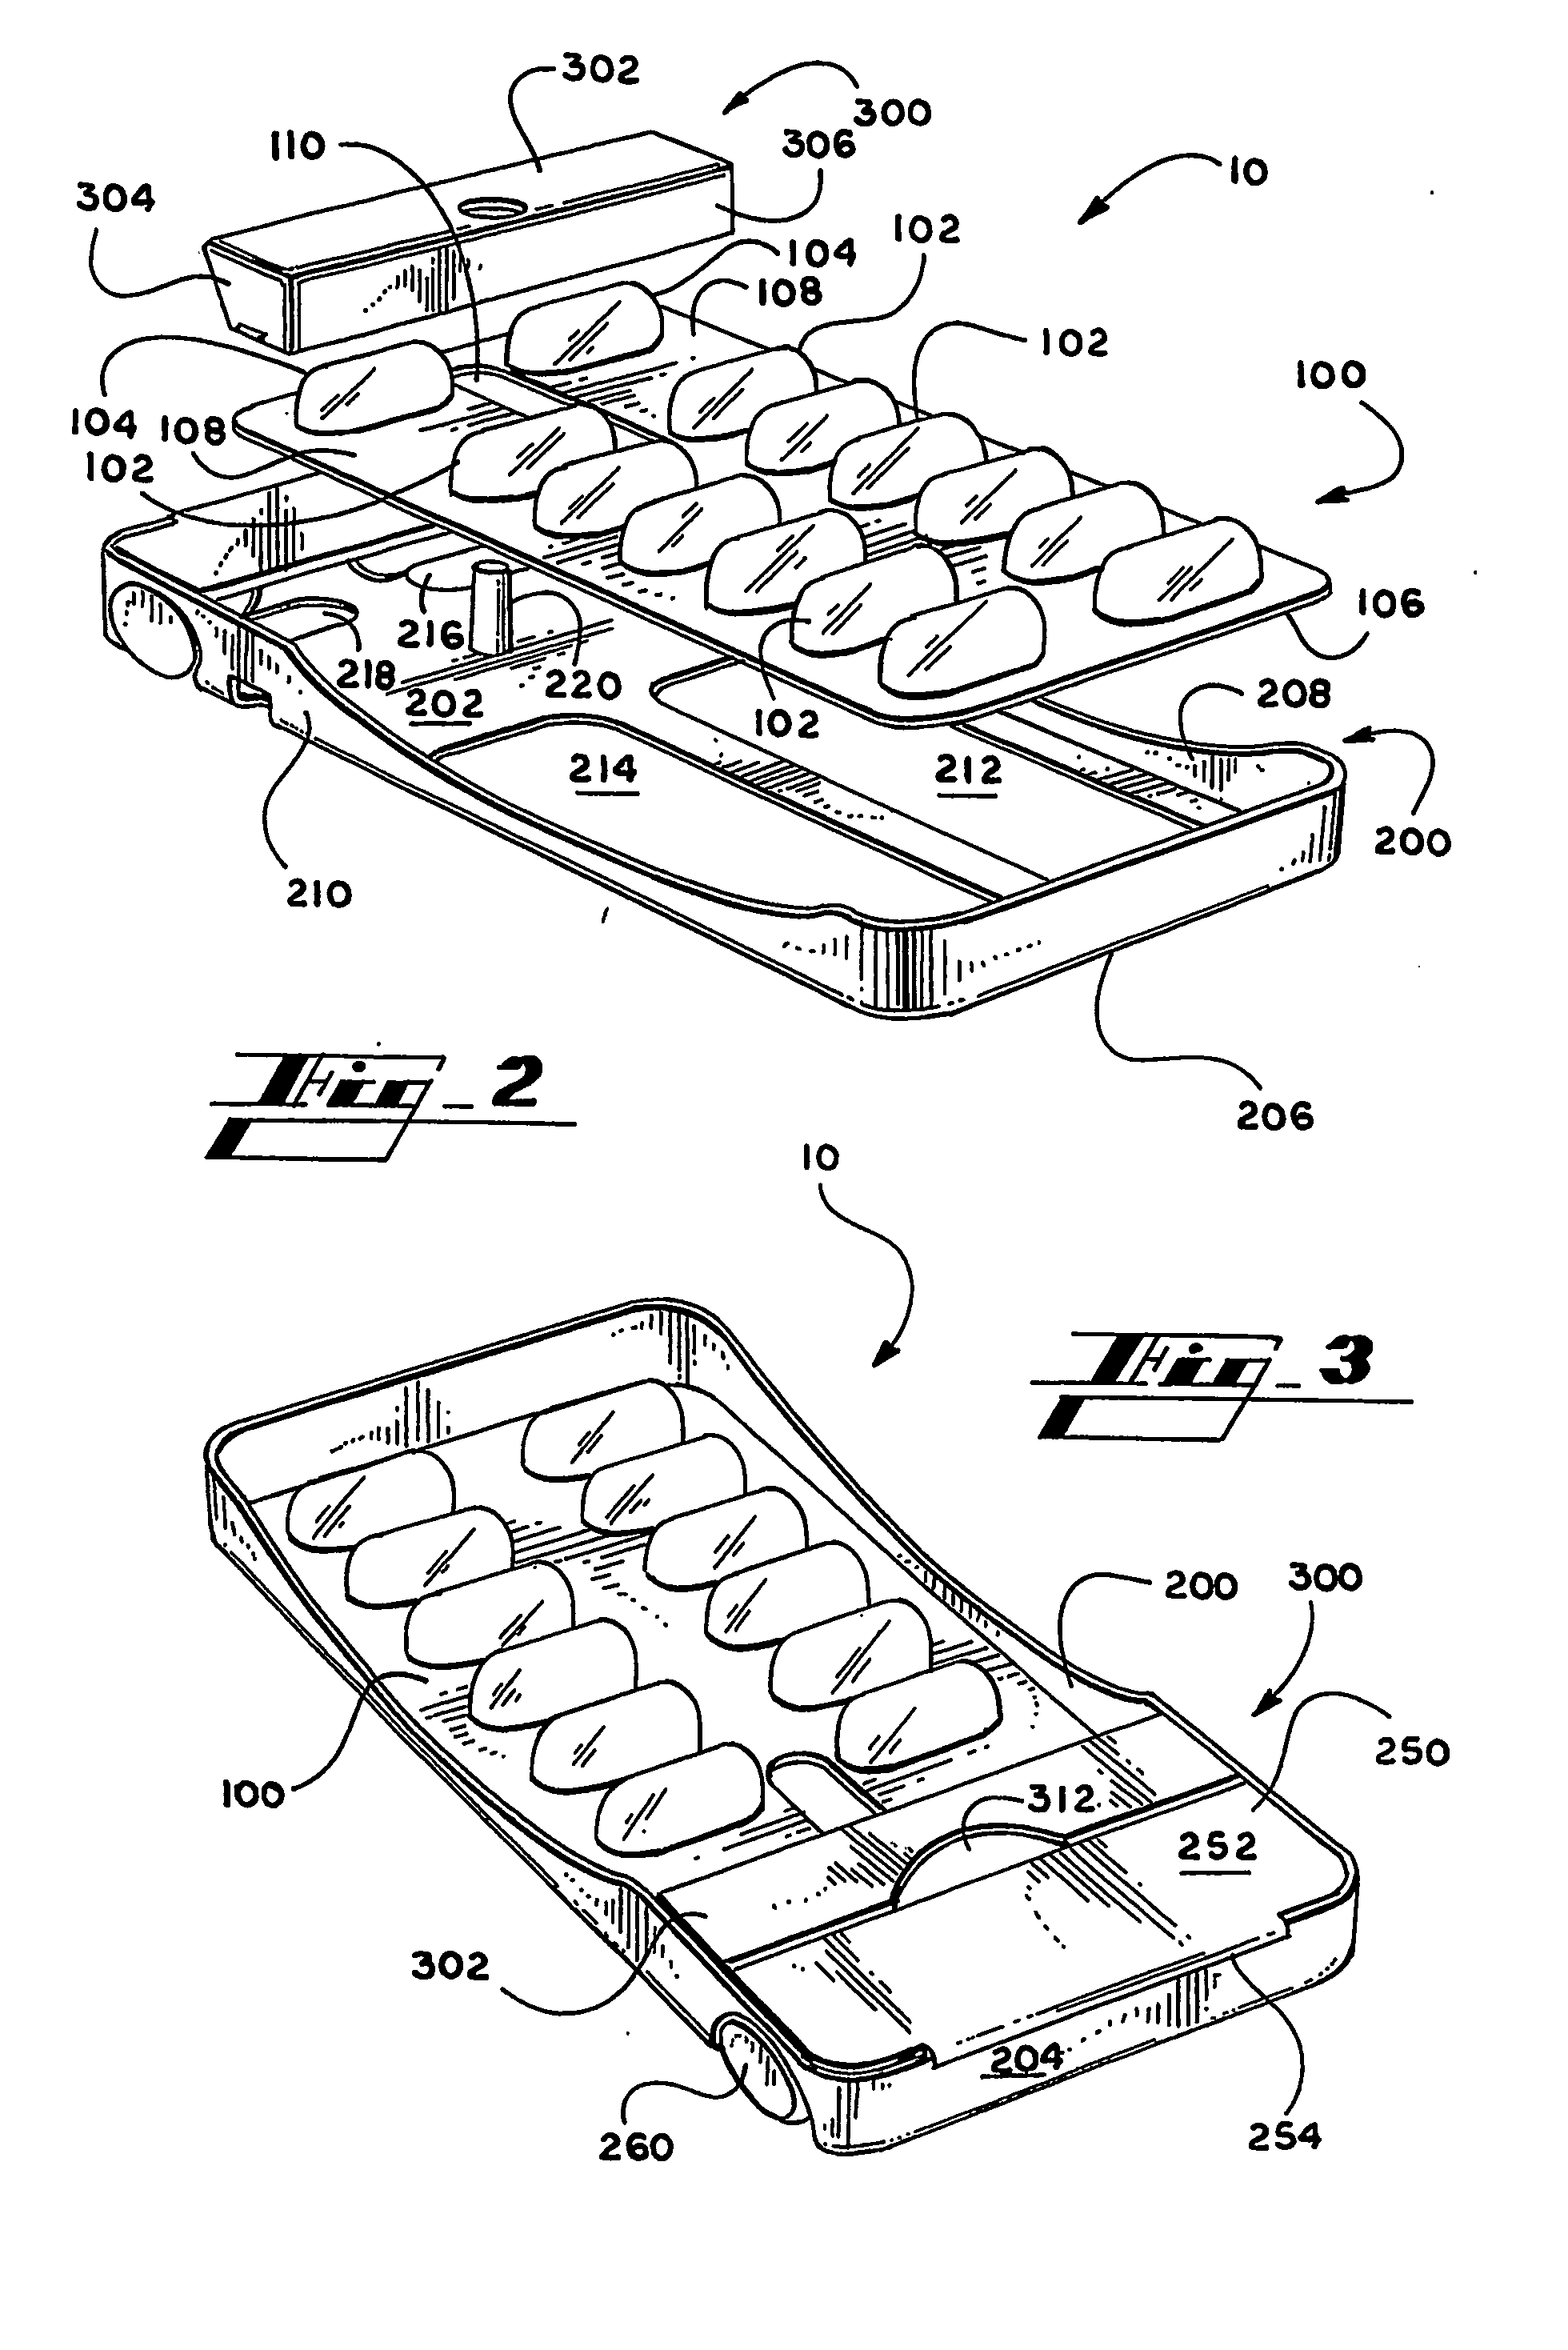 Child-Resistant Packaging System and Method for Making Same